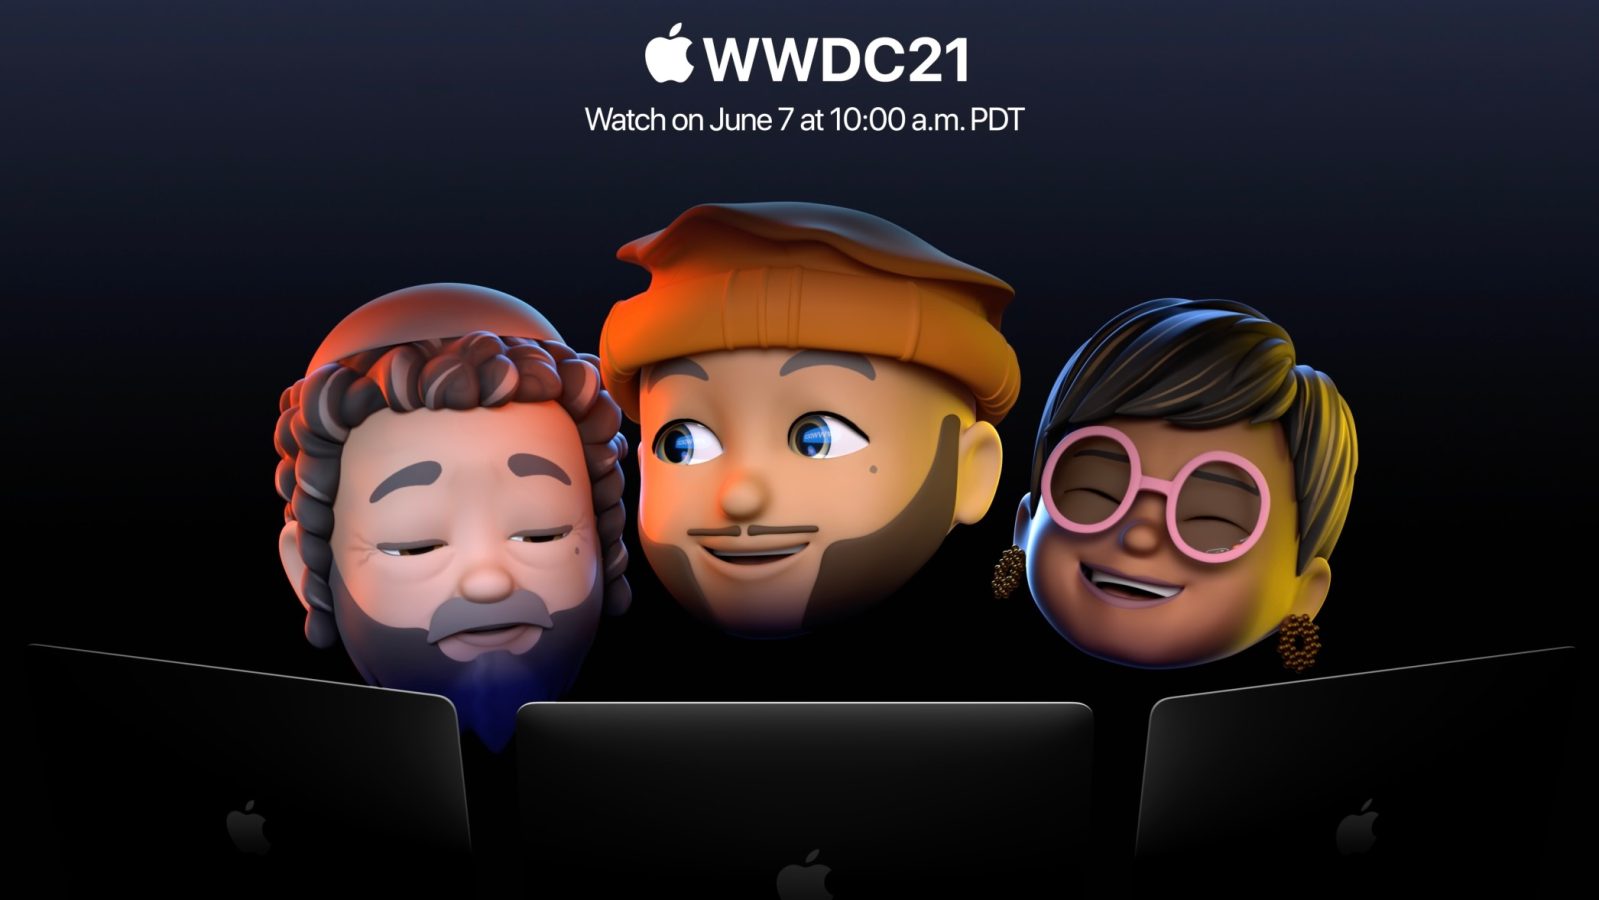 WWDC 2021 News Hub: iOS 15, watchOS 8, and more- 9to5Mac